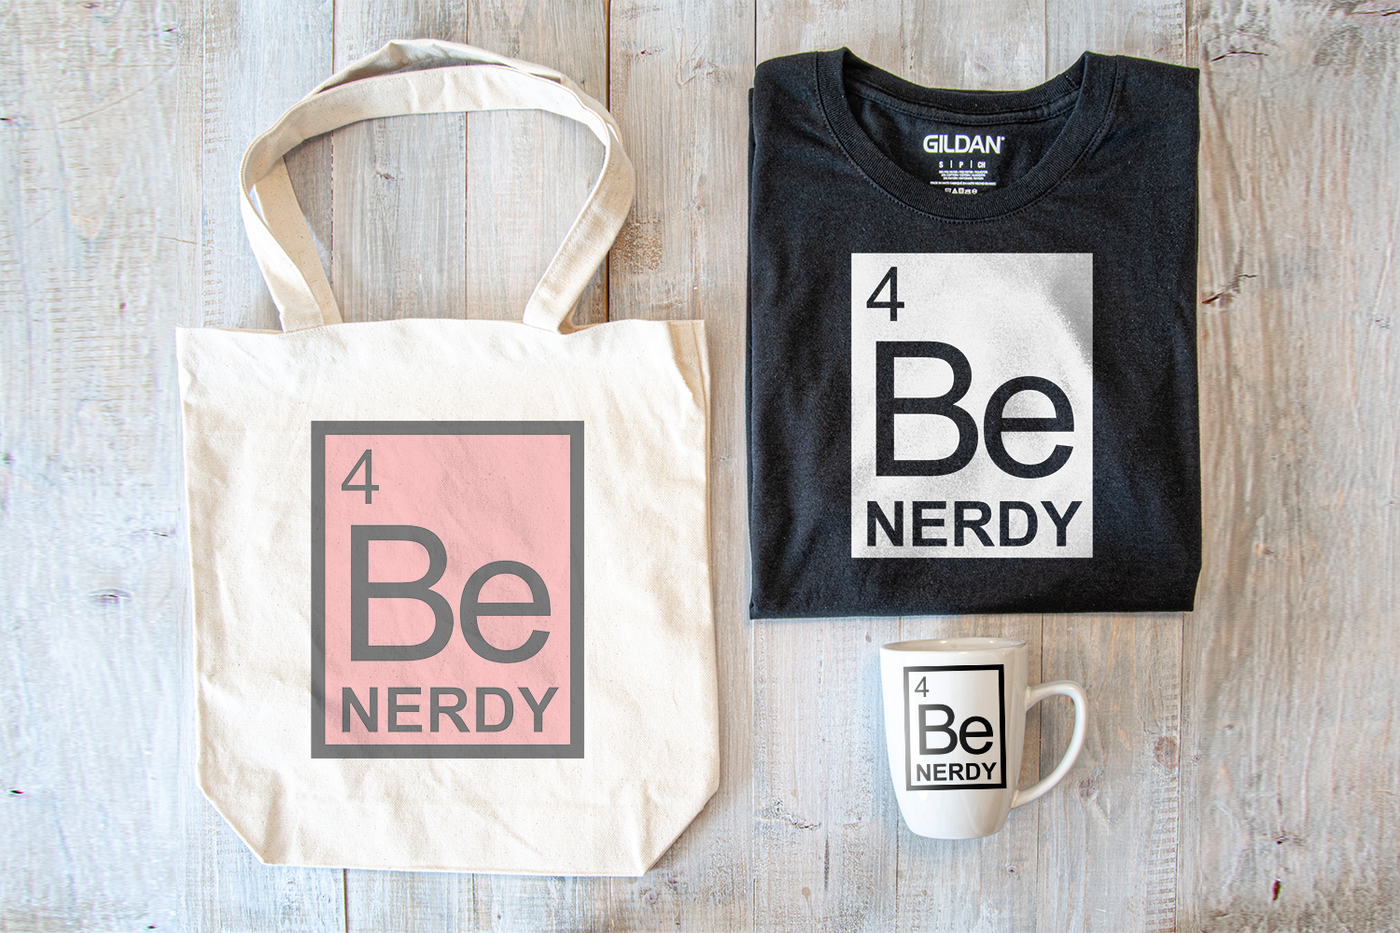 A chemical symbol has the words "Be Nerdy." SVG design is shown in 1 and 2 color variations on a shirt, tote, and mug.